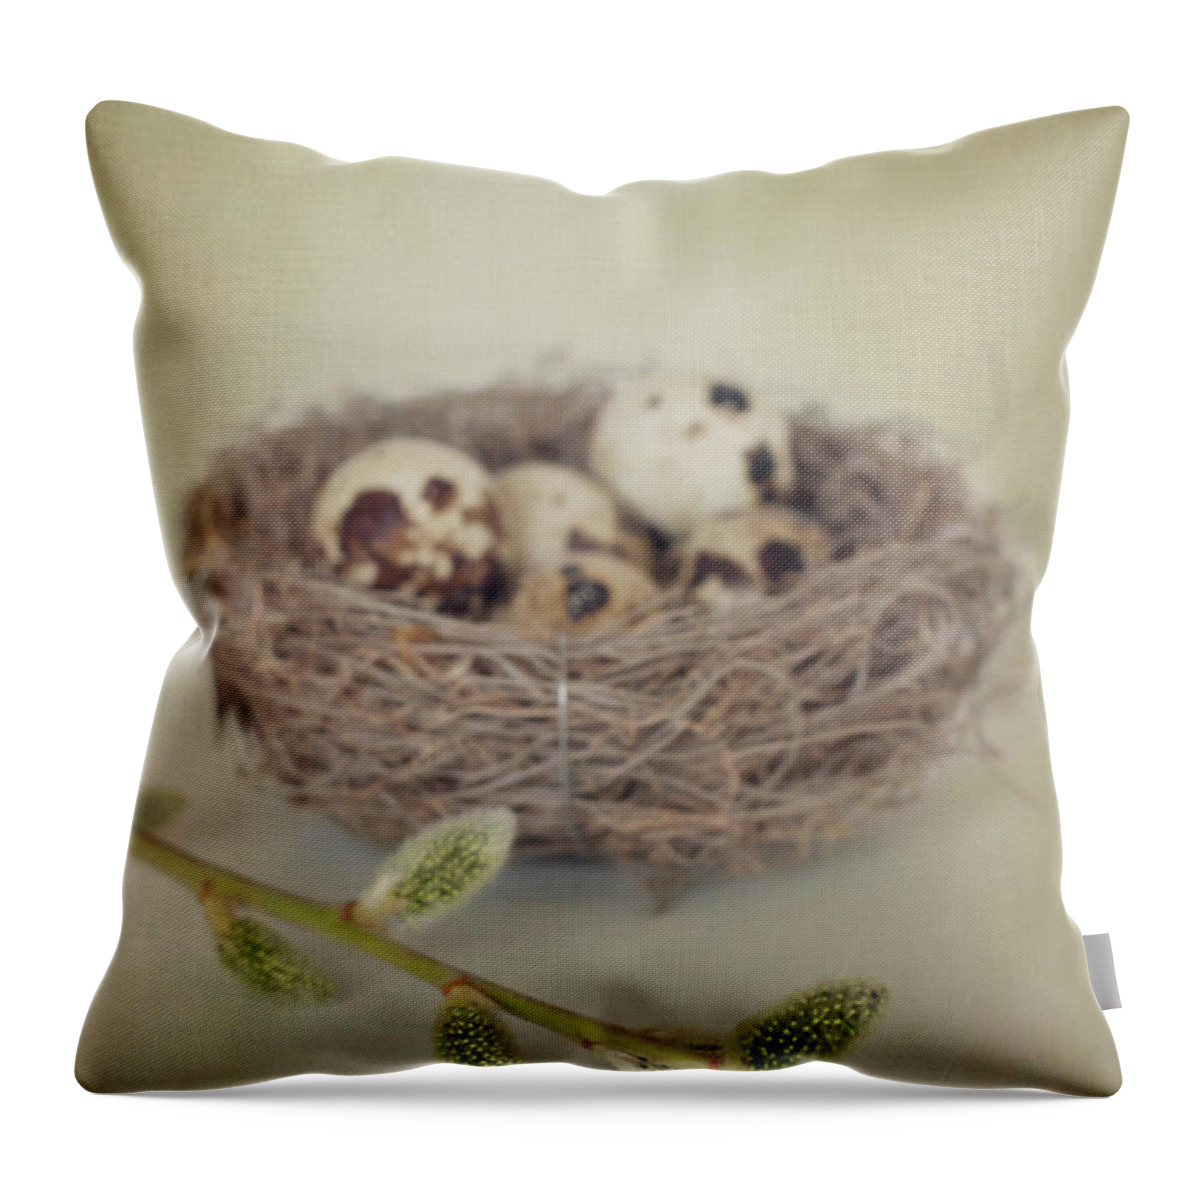 Event Throw Pillow featuring the photograph Easter Nest by Photo By Stefanie Senholdt